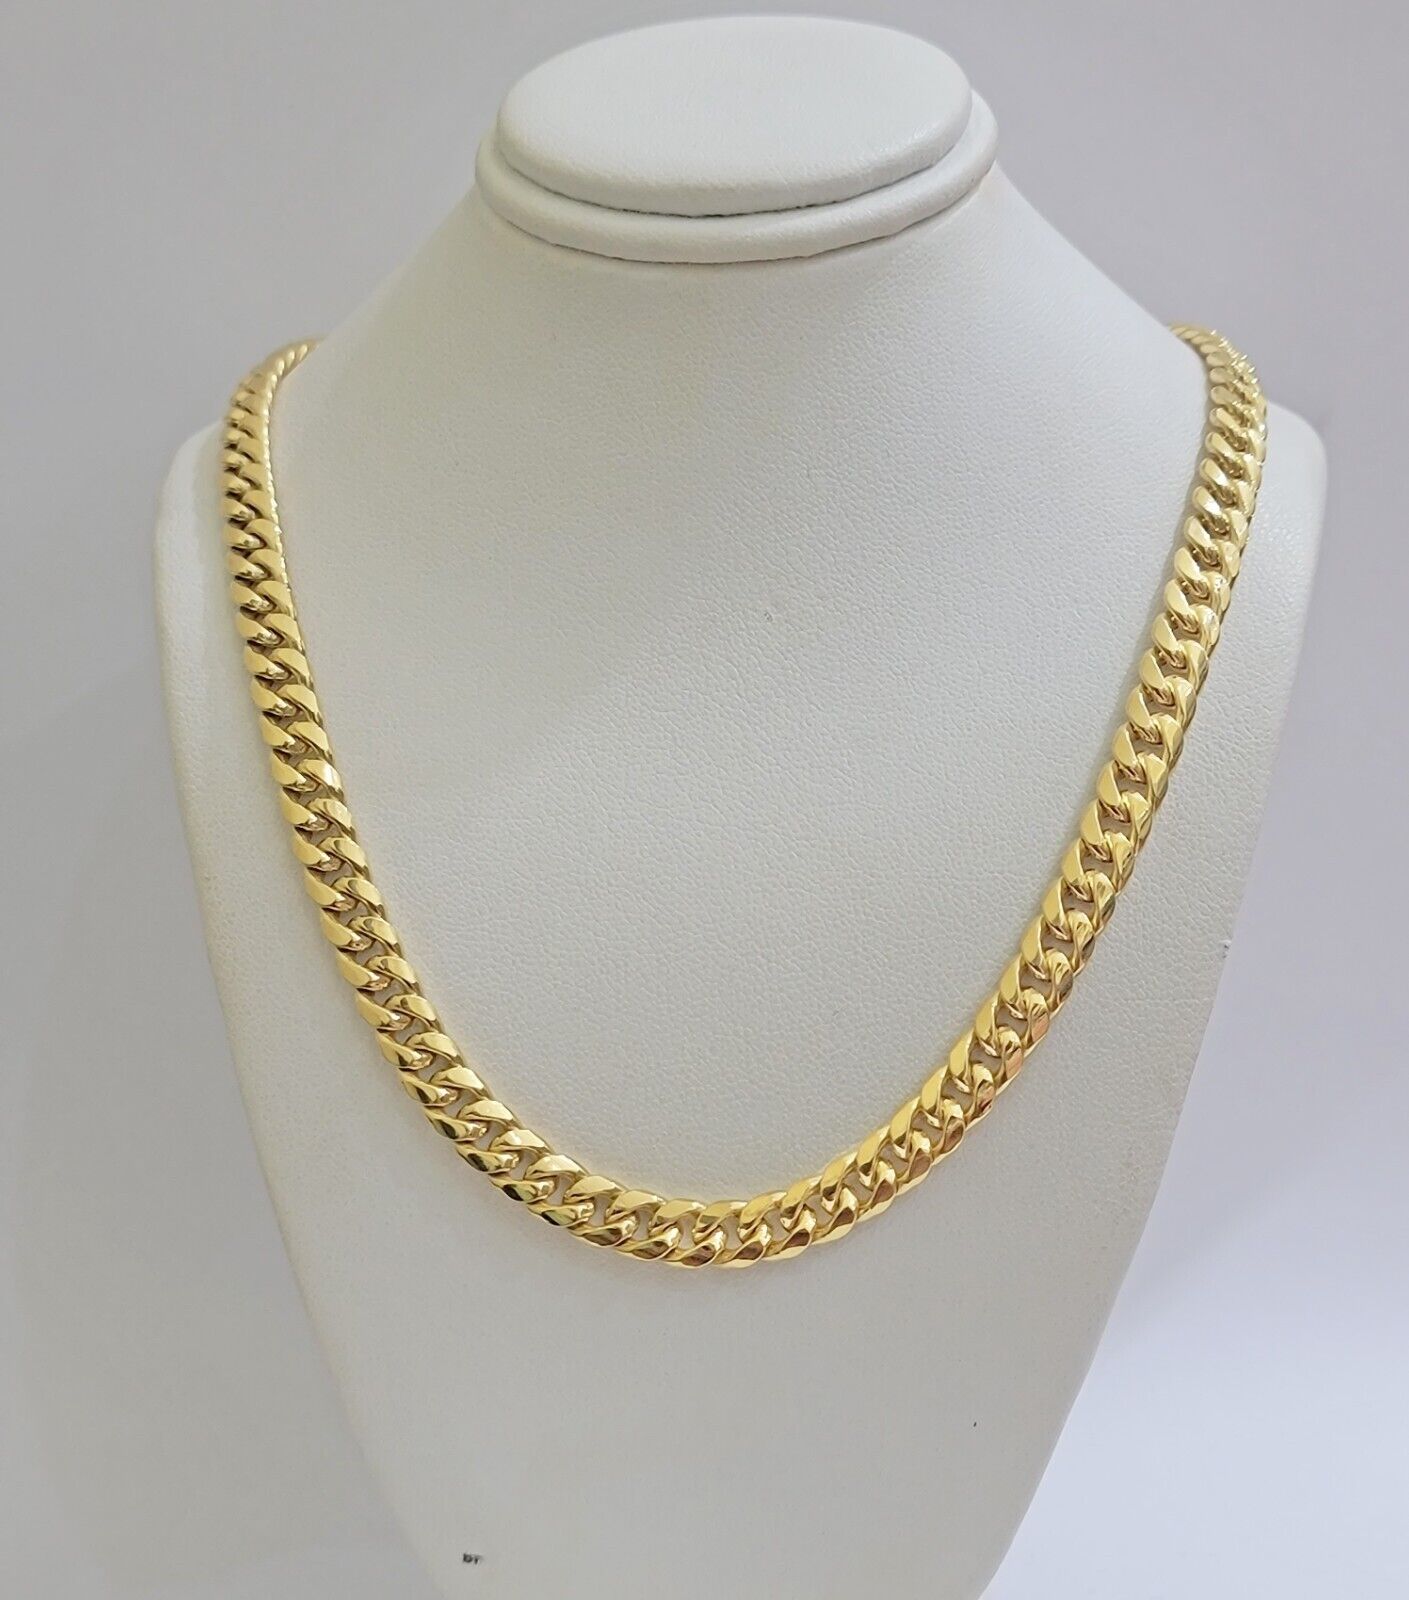 10k Gold Necklace 7mm 22 Inch Miami Cuban Link Chain REAL 10kt yellow Gold Men's